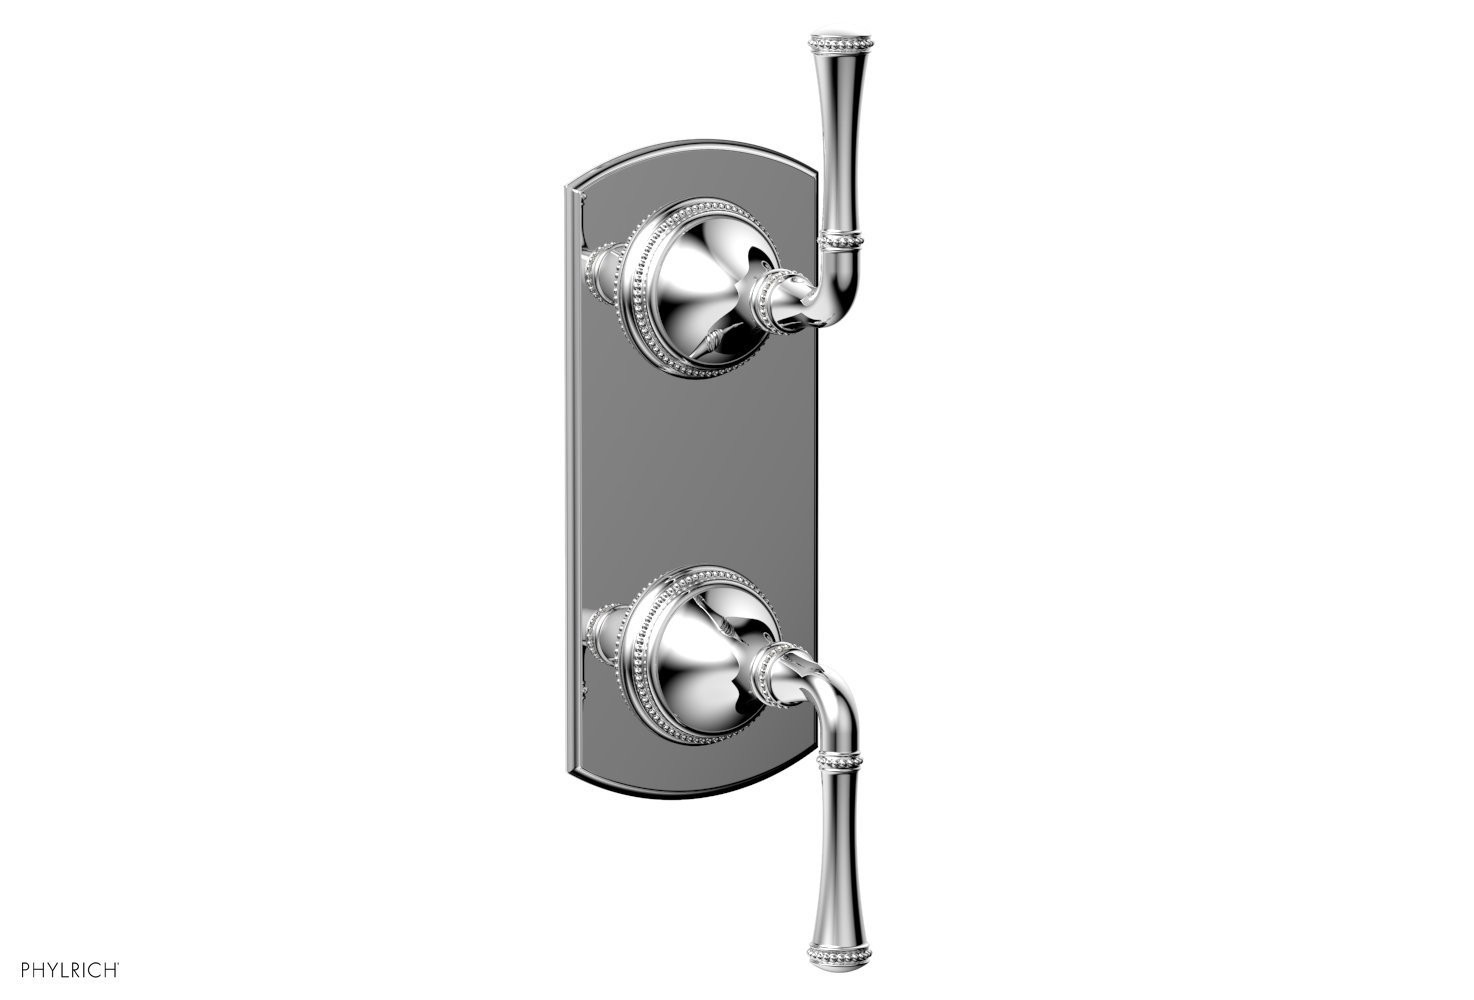 PHYLRICH 4-131 BEADED WALL MOUNT LEVER HANDLE MINI THERMOSTATIC VALVE WITH VOLUME CONTROL OR DIVERTER TRIM